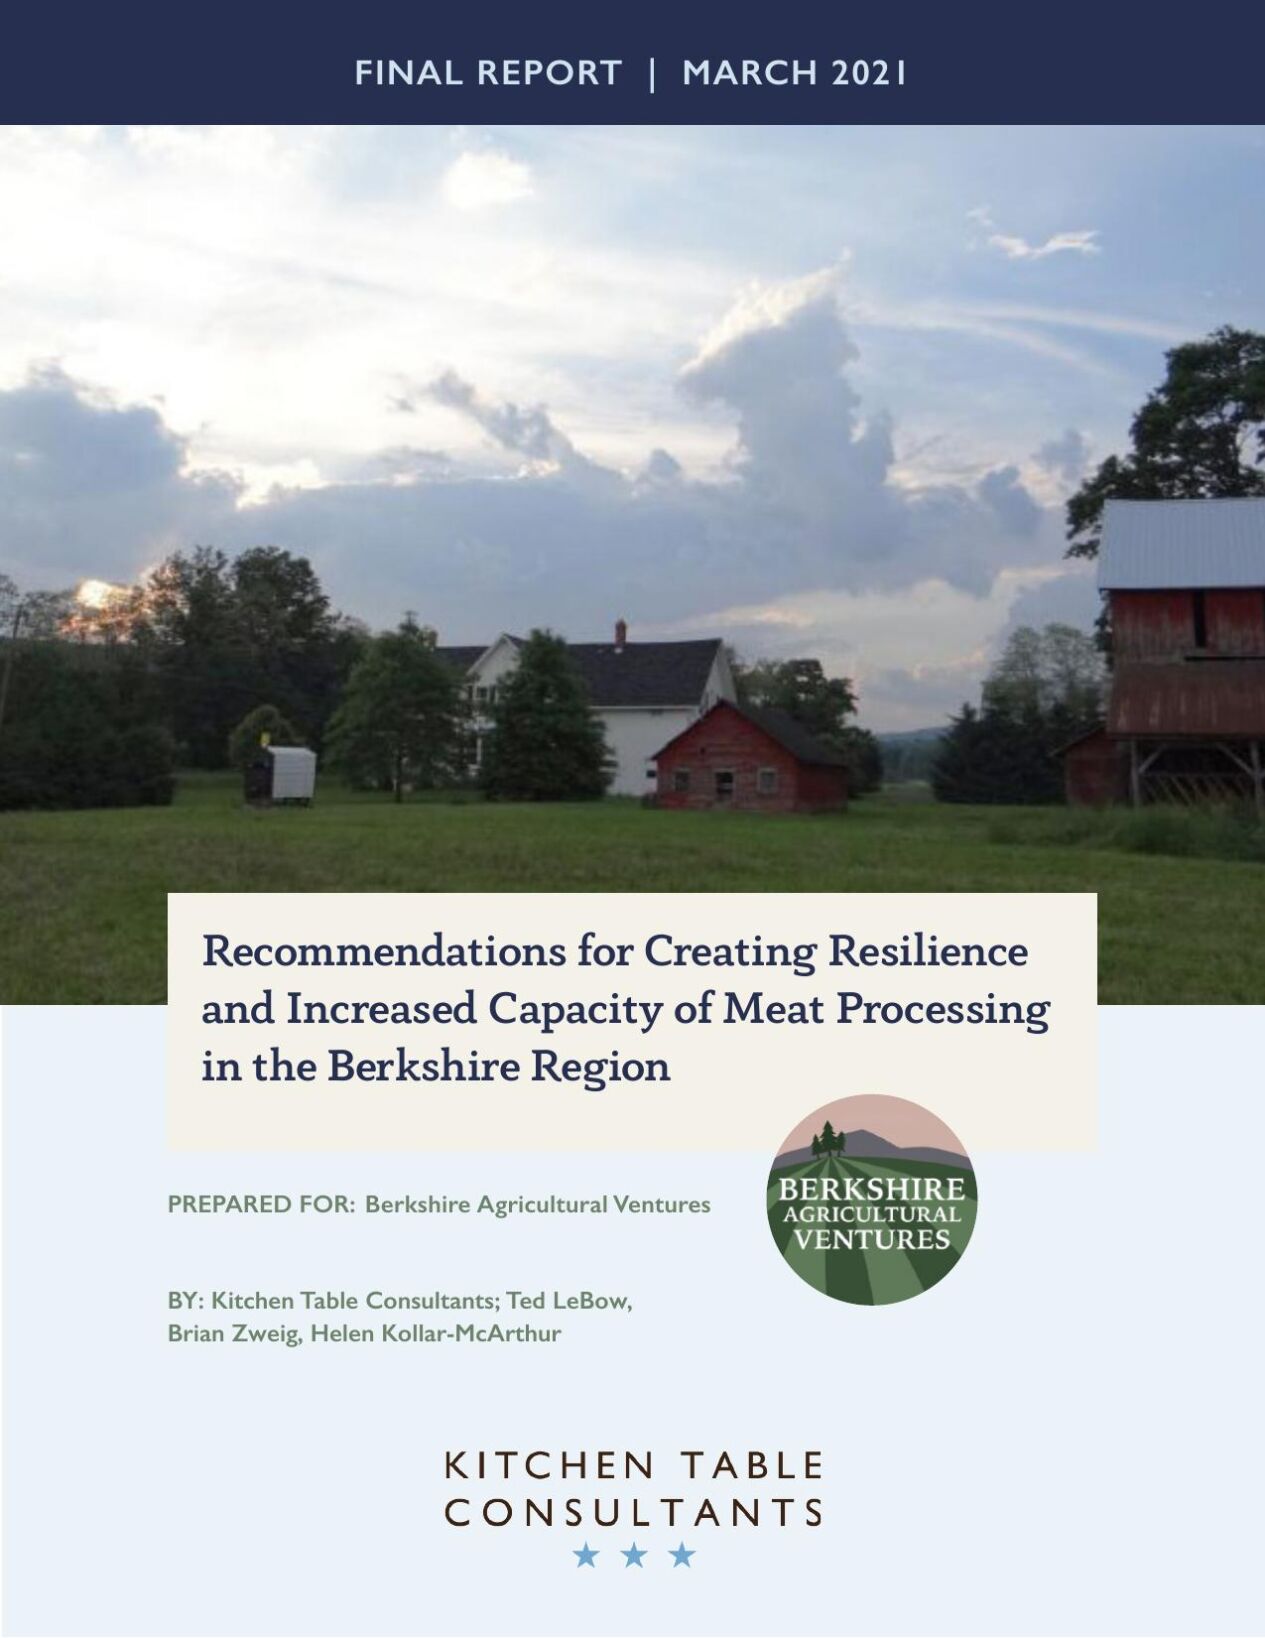 Recommendations for Creating Resilience and Increased Capacity of Meat Processing in the Berkshire Region